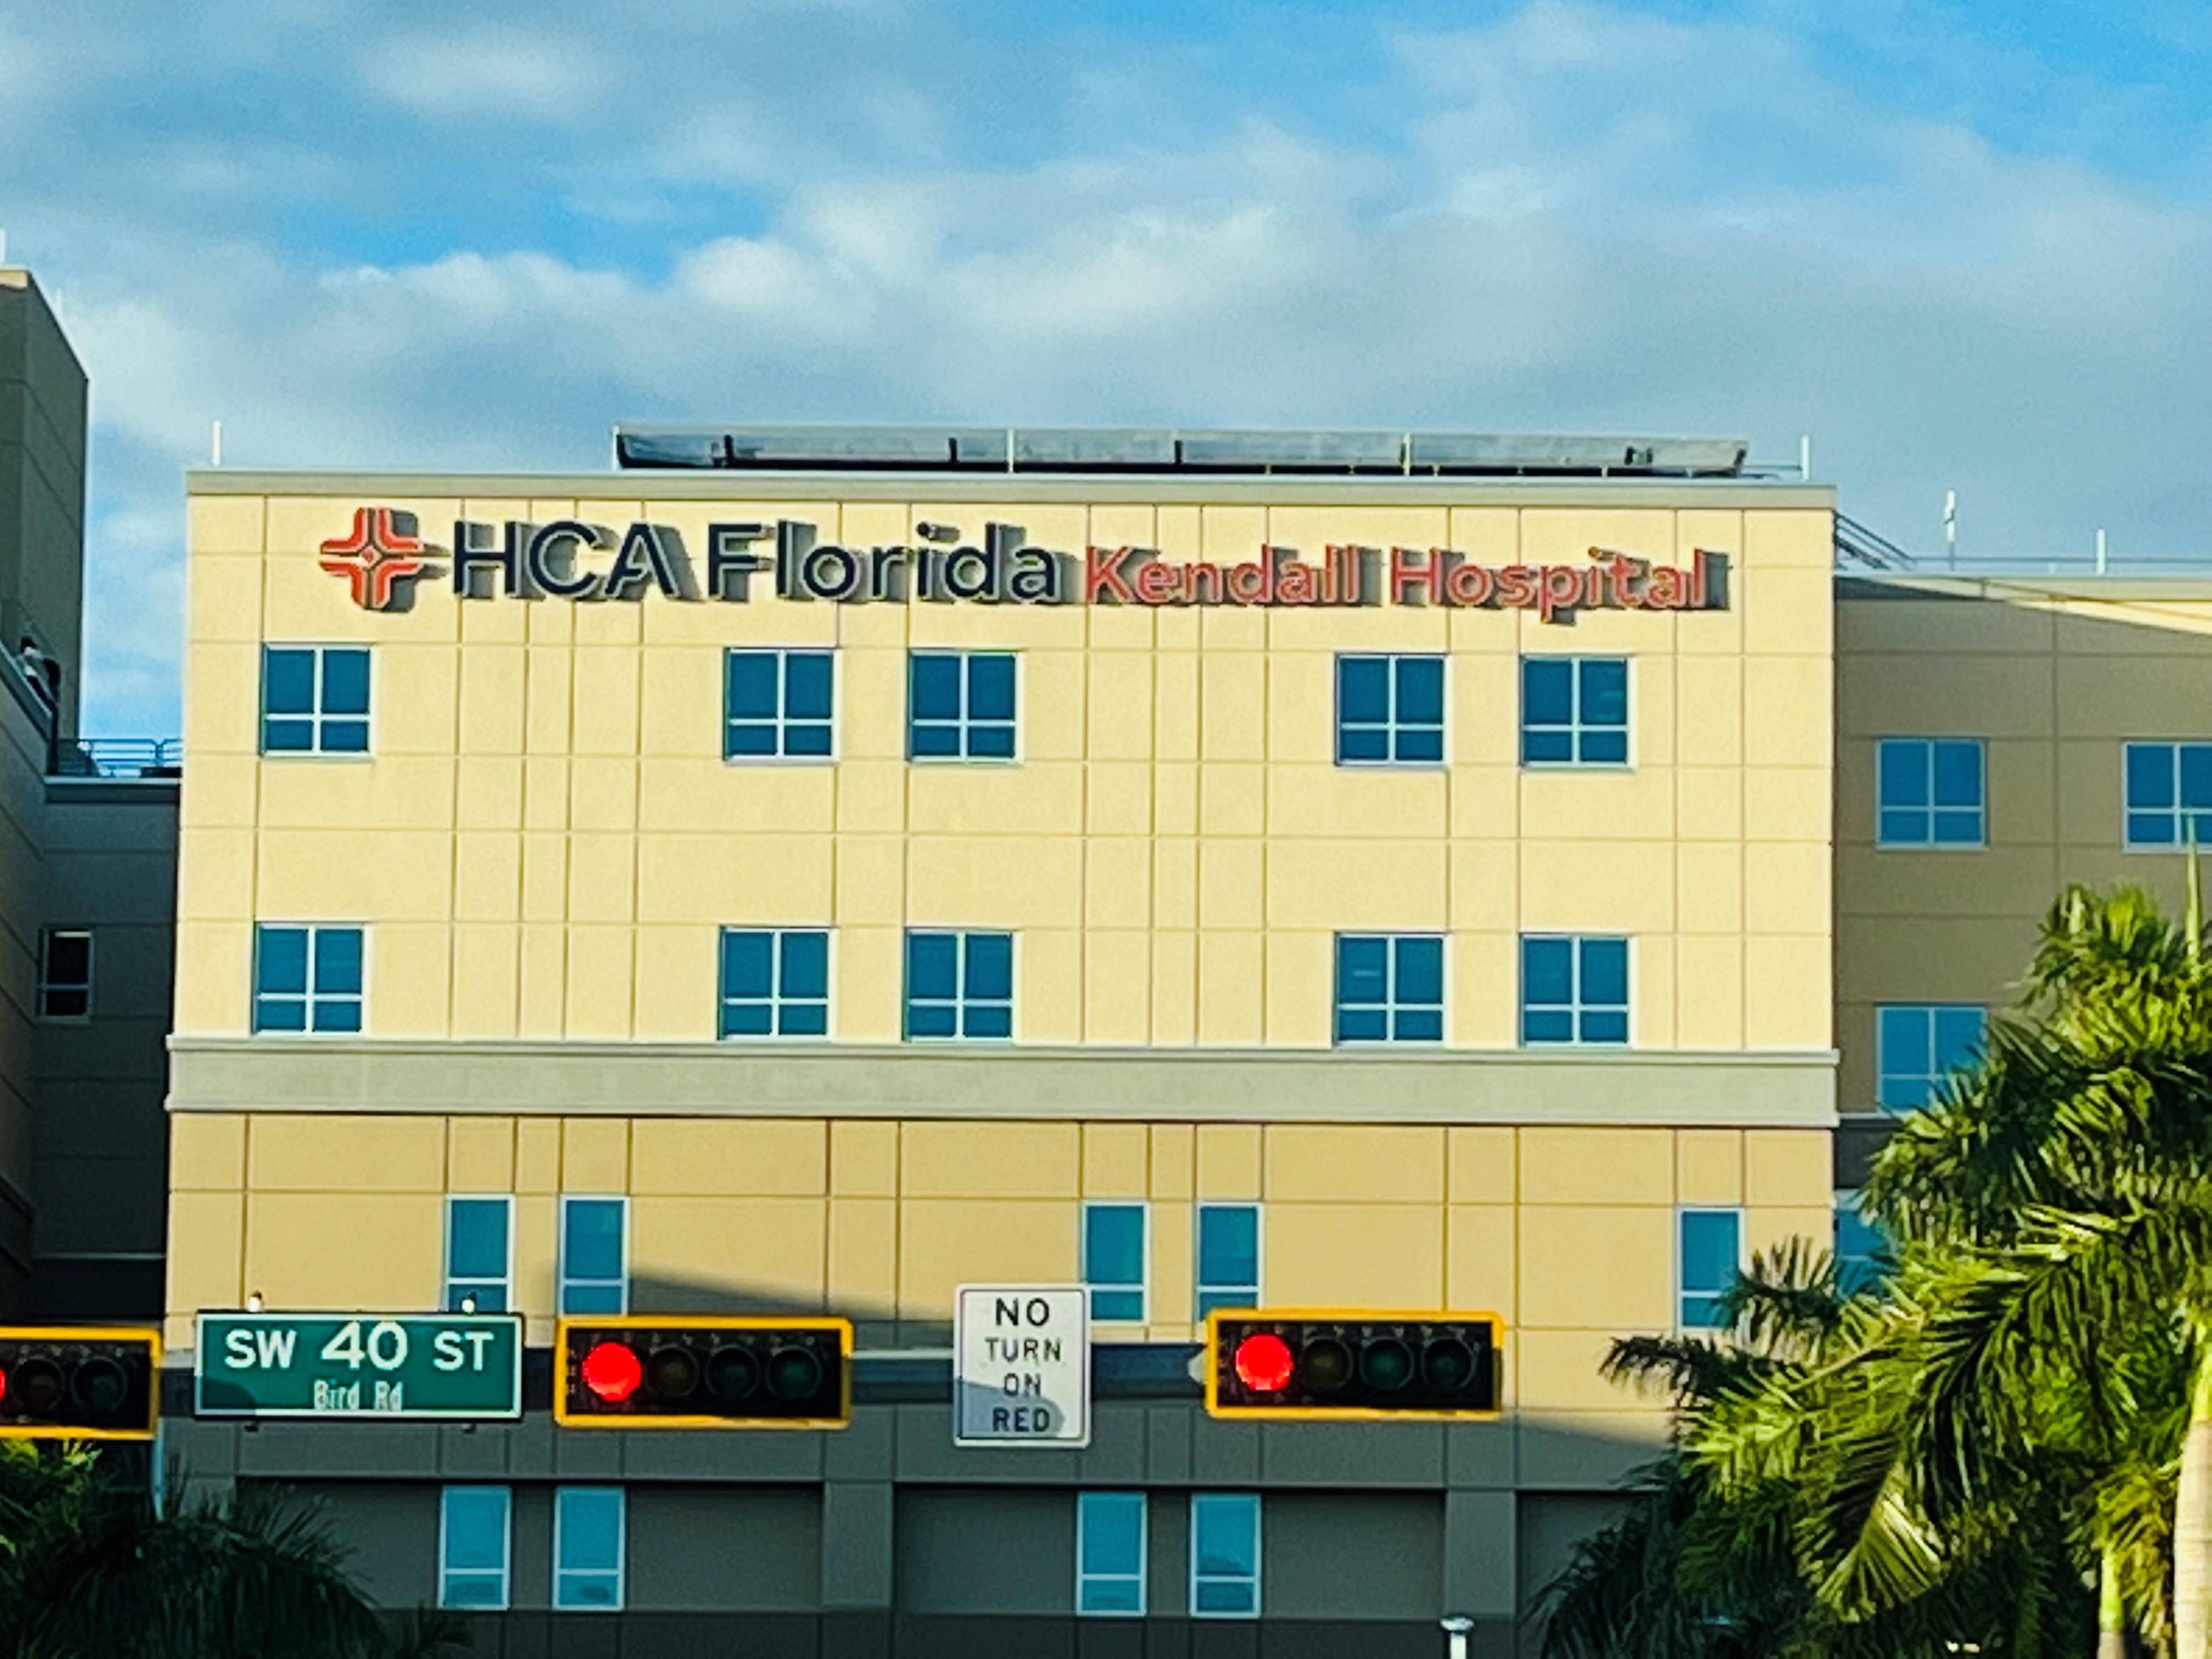 Exterior photo of Kendall Hospital showing sign, palm trees, and traffic lights.